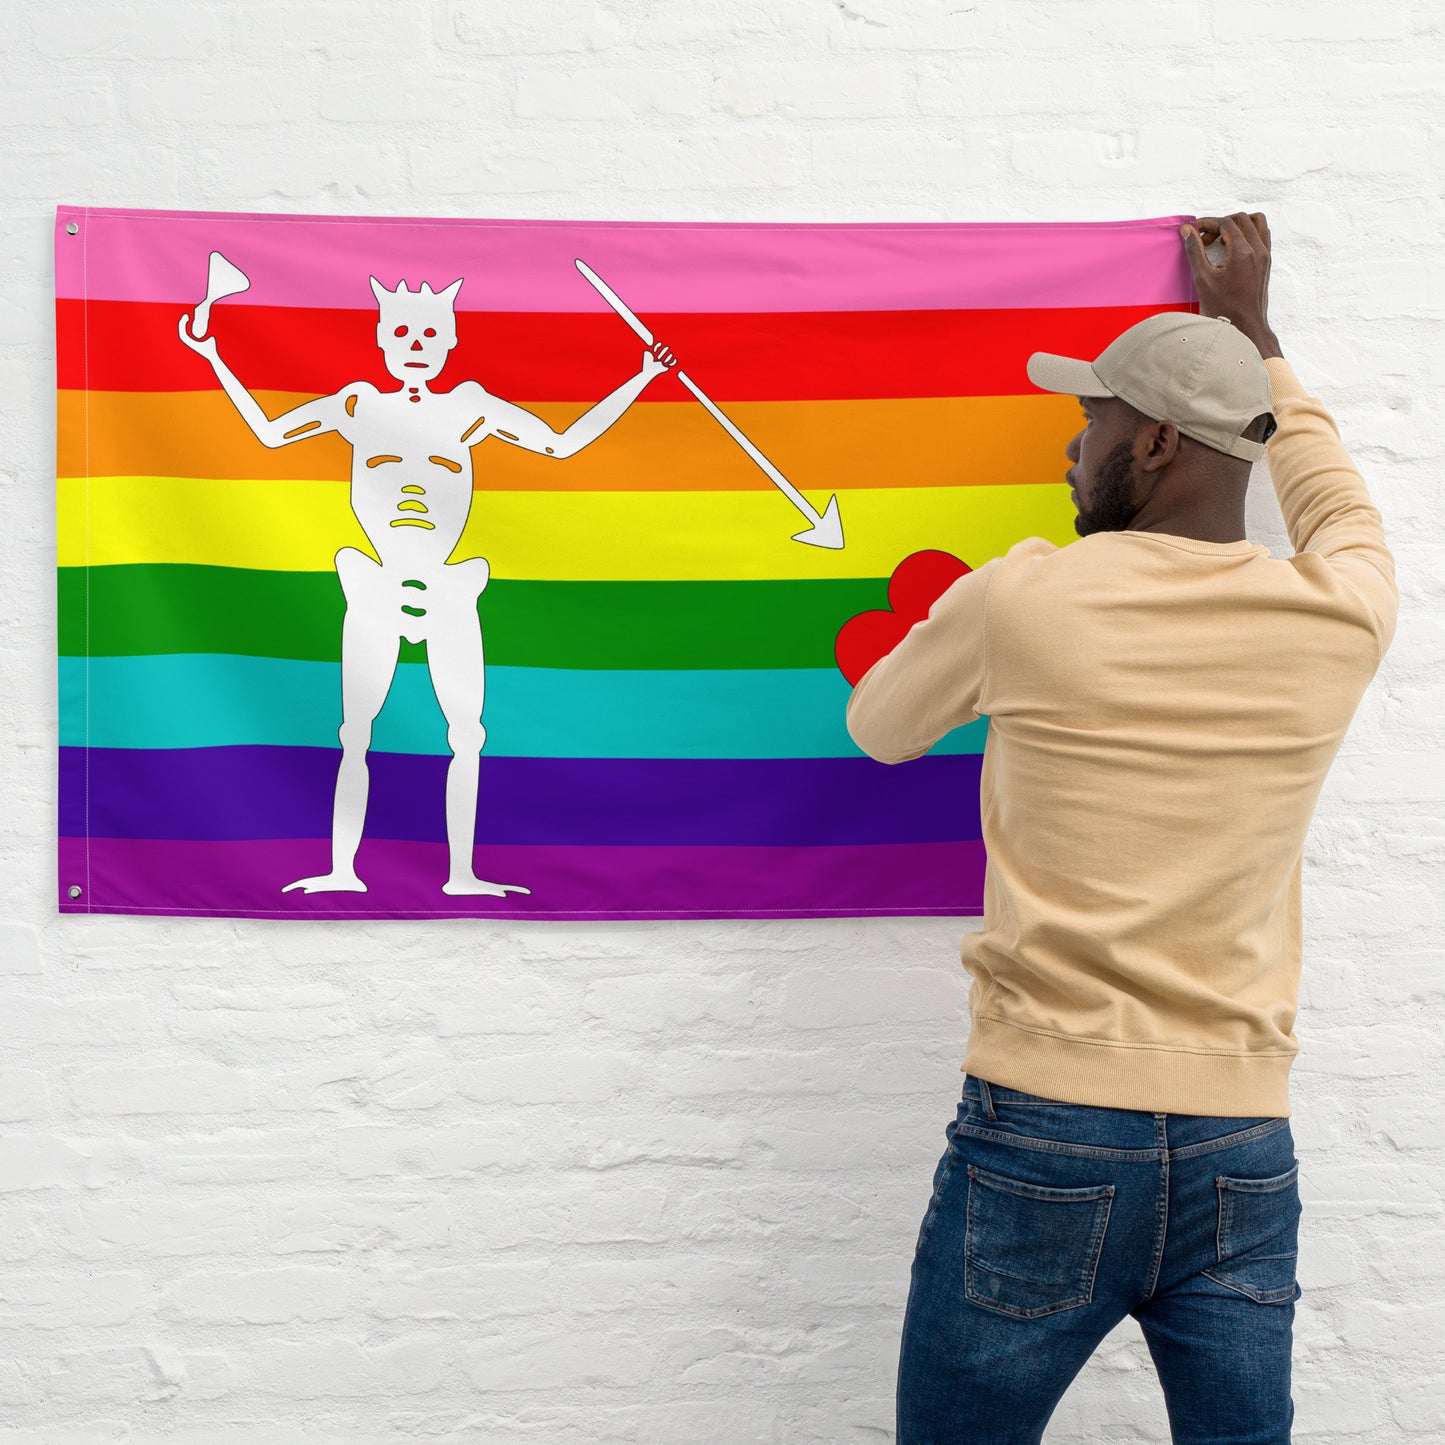 the gilbert baker flag with stripes of pink, red, orange, yellow, green, turquoise, indigo, and purple and blackbeard's symbol being hung on the wall by a person with dark skin and a beard